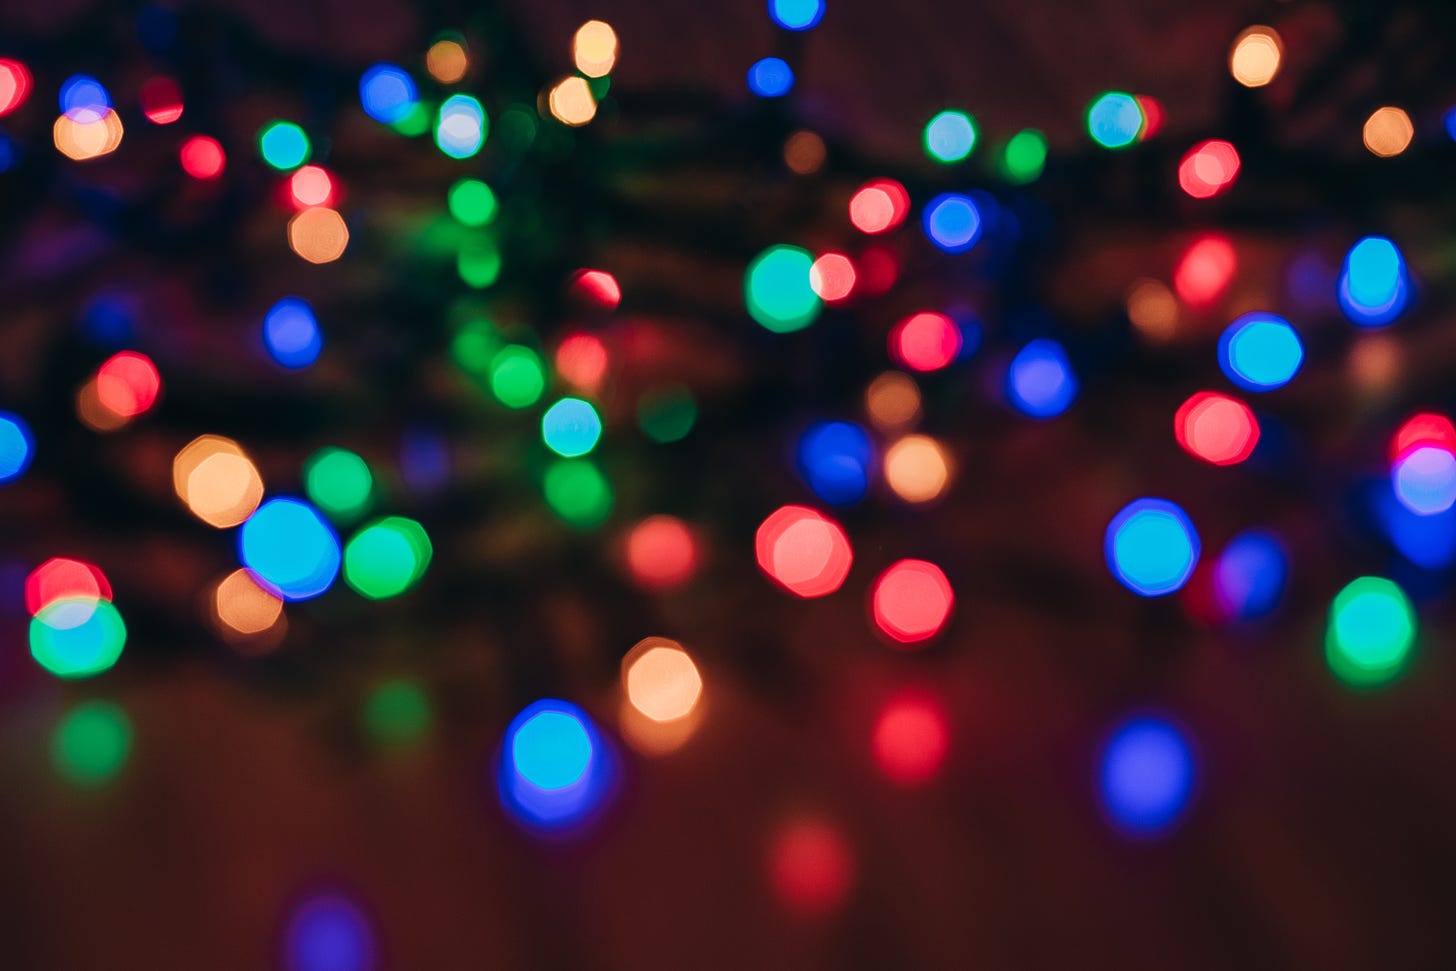 Blurry view of an illuminated strand of multicolored holiday lights